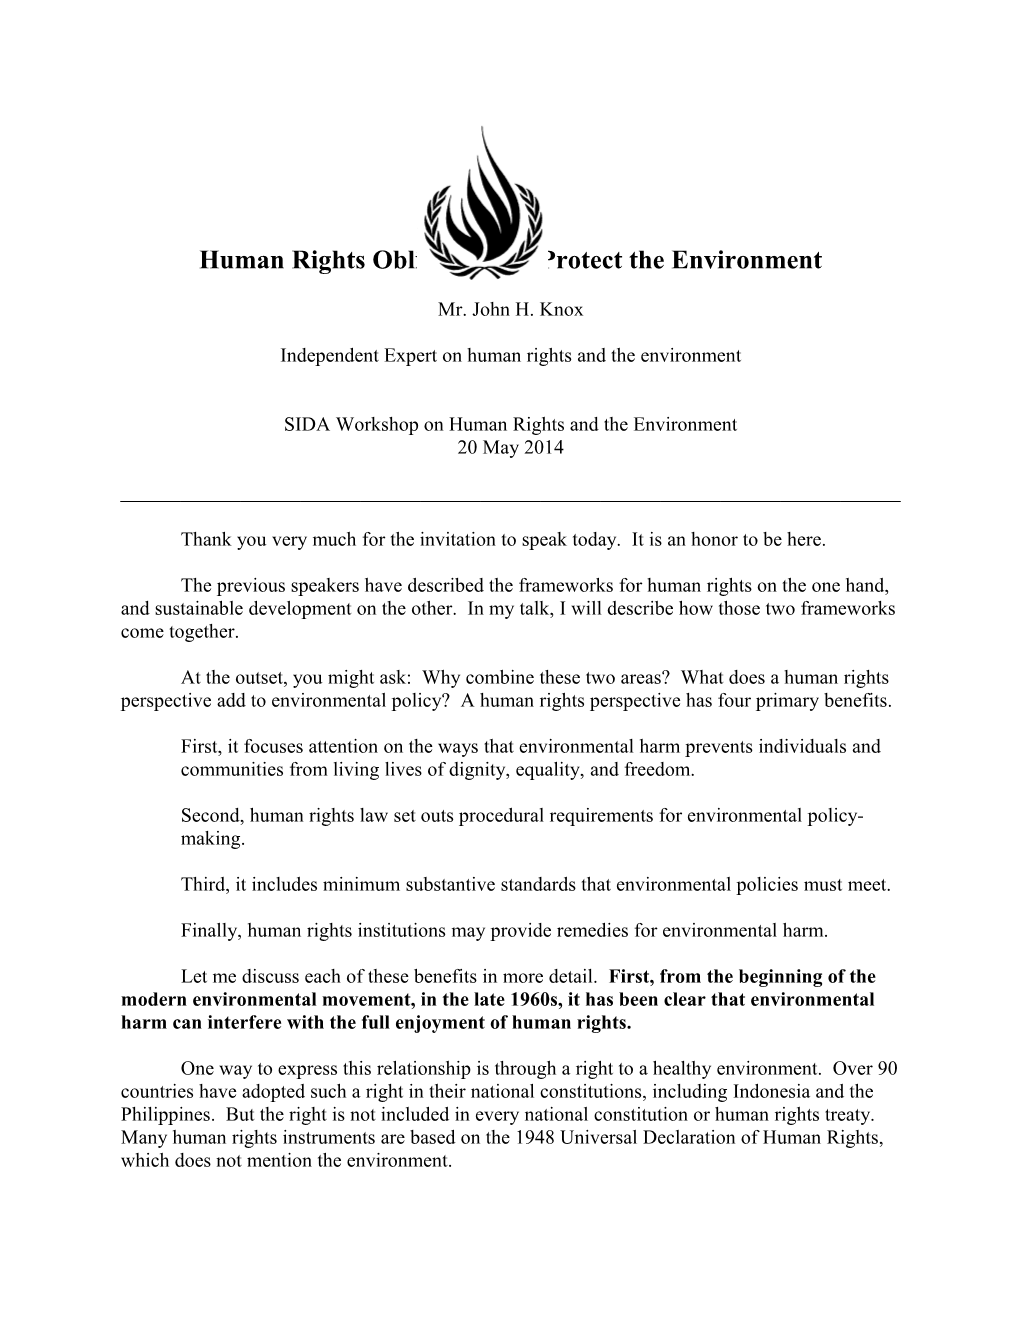 Human Rights Obligations to Protect the Environment